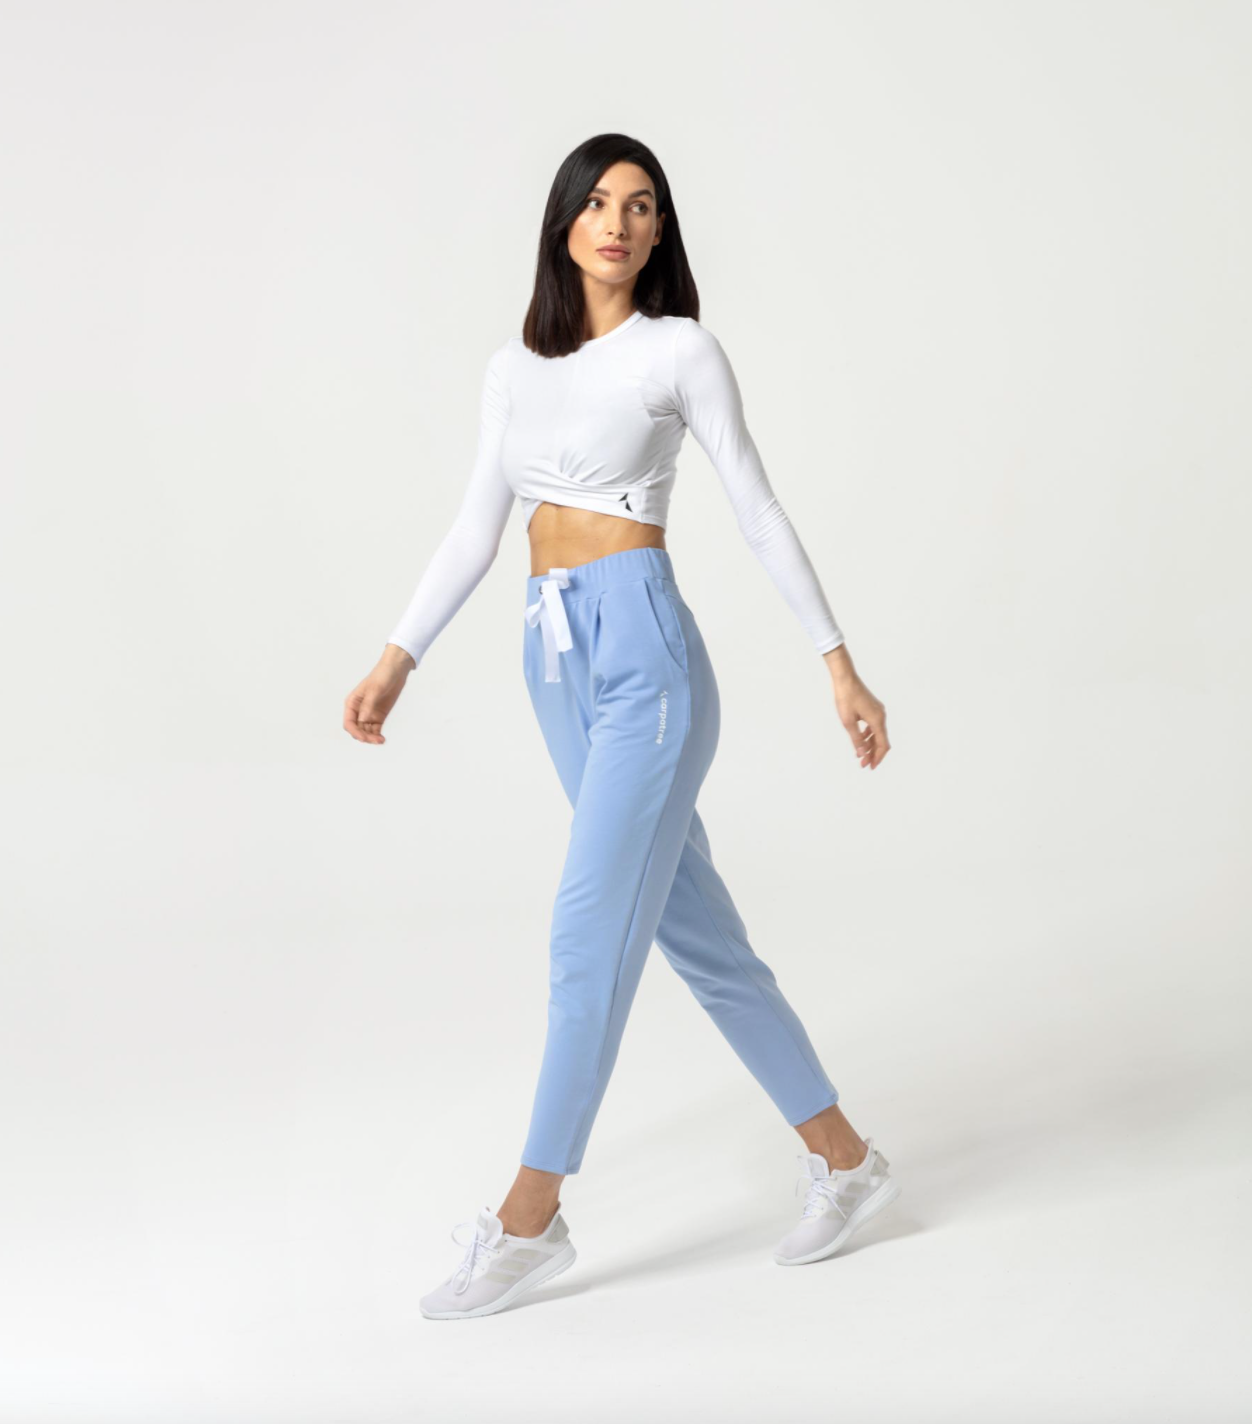 Carpatree Gaia Longsleeve Top - White cropped long sleeve sports top with twist detail. Made of soft cotton.